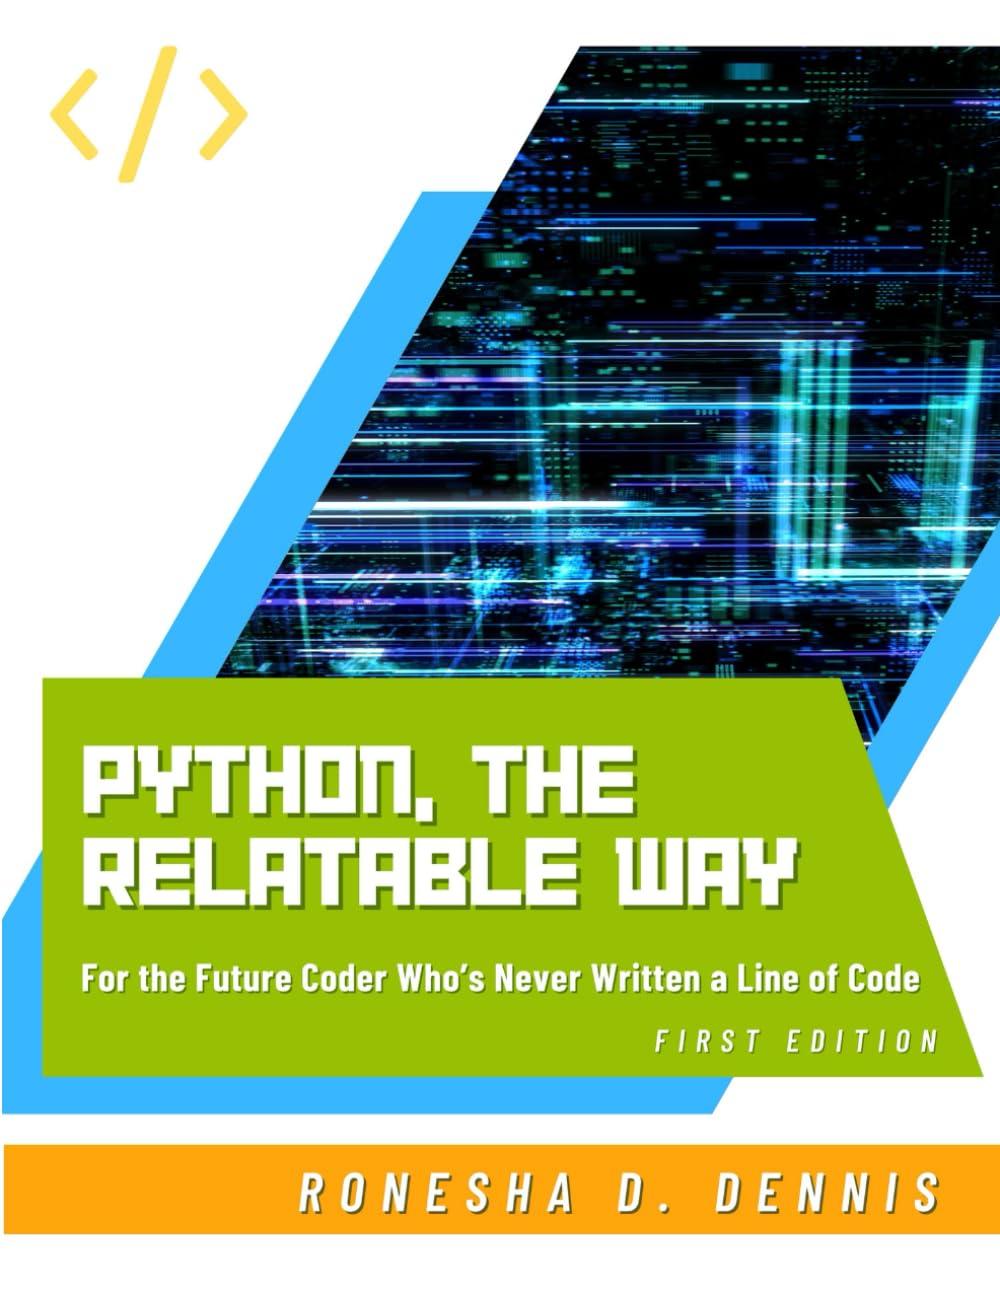 python the relatable way for the future coder who's never written a line of code 1st edition ronesha d.